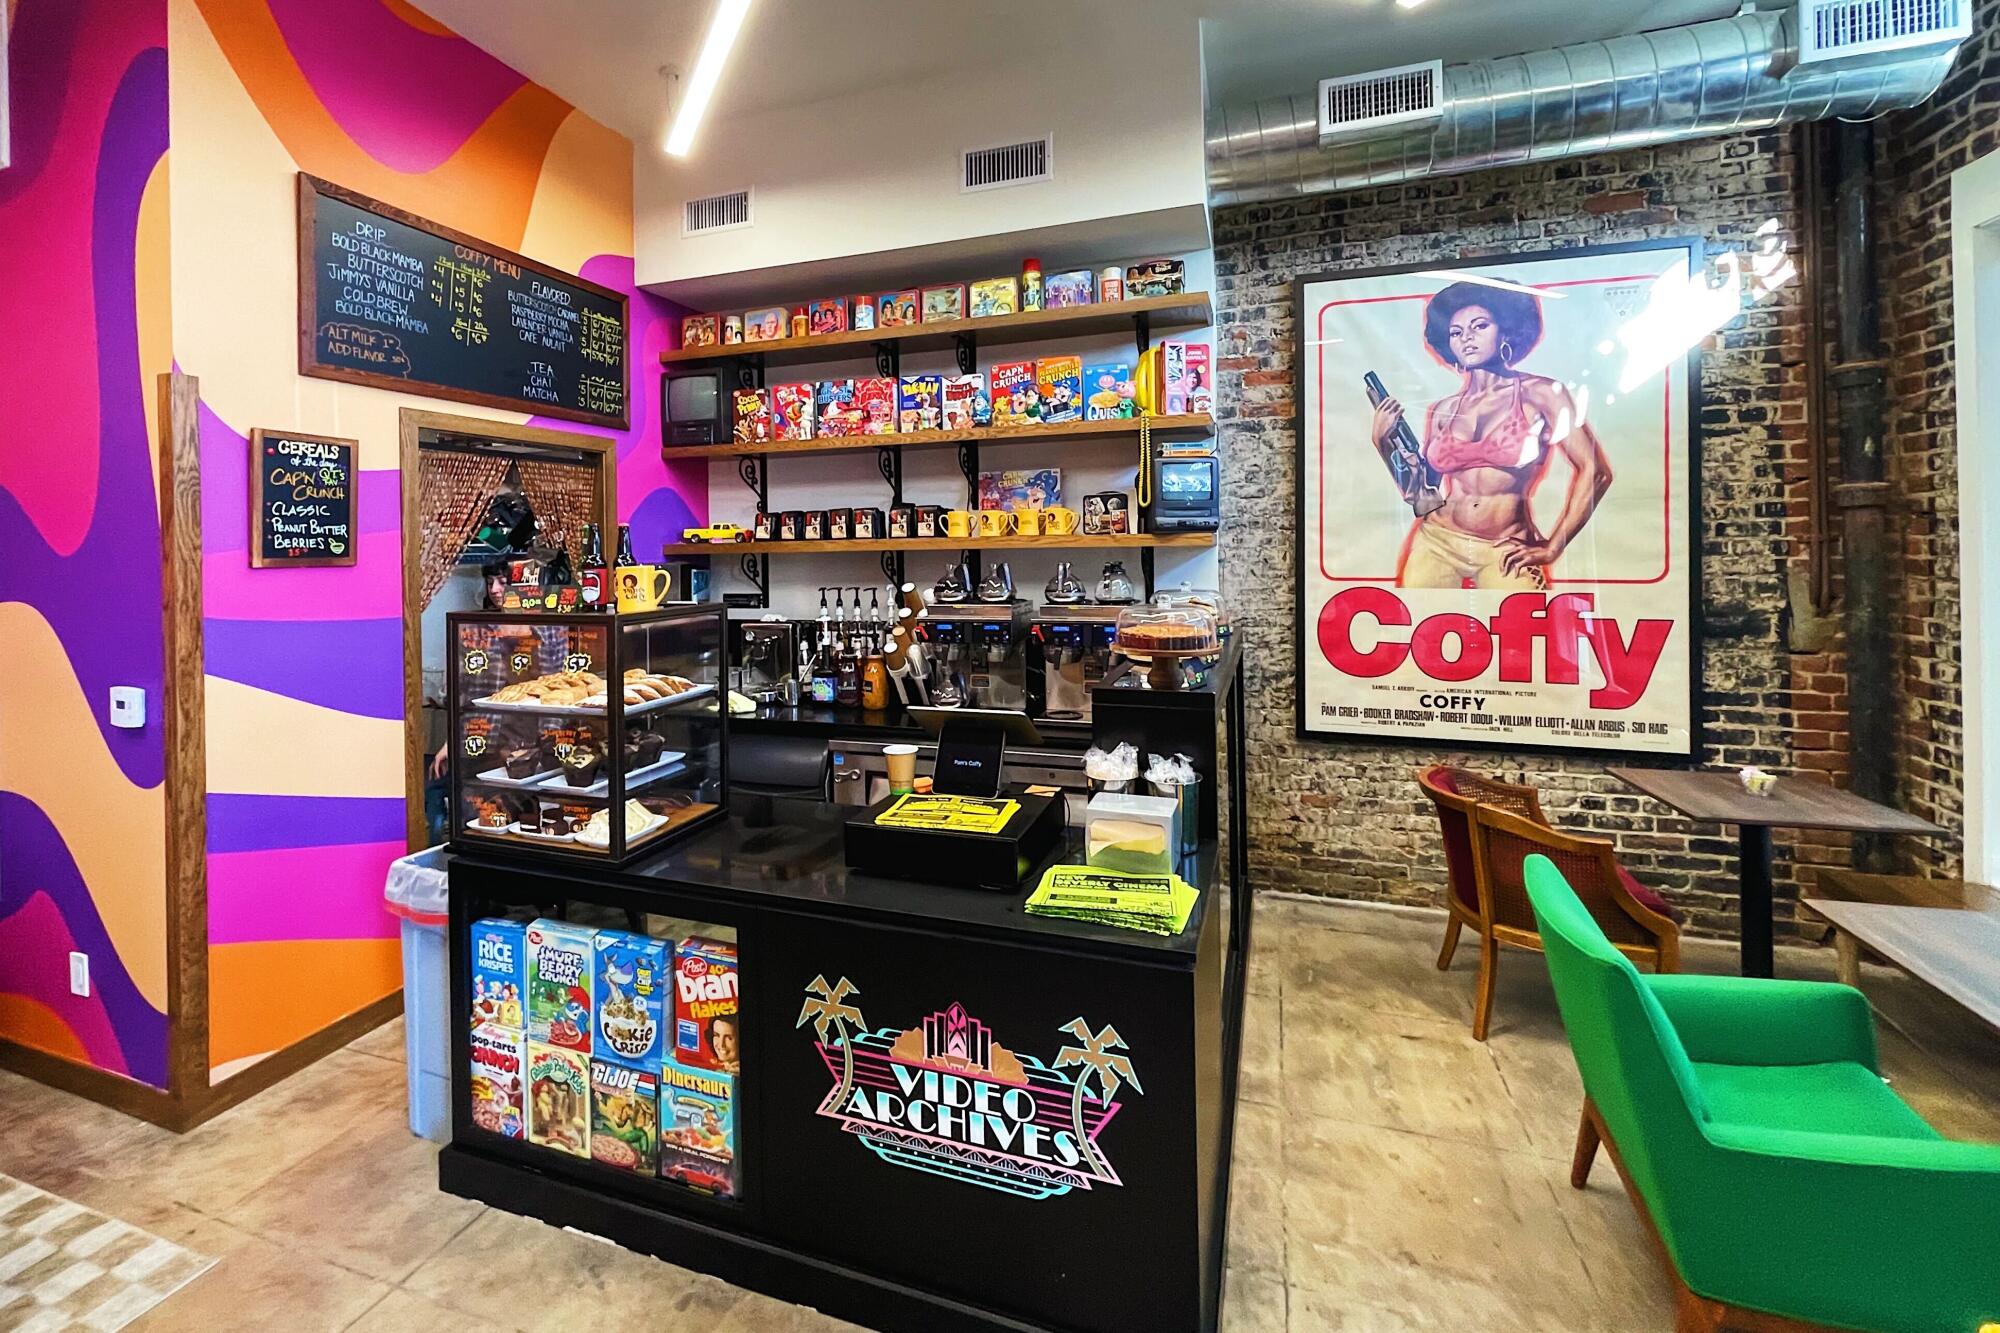 An interior view of Quentin Tarantino's cafe Pam's Coffy with a big Pam Grier movie poster on the wall